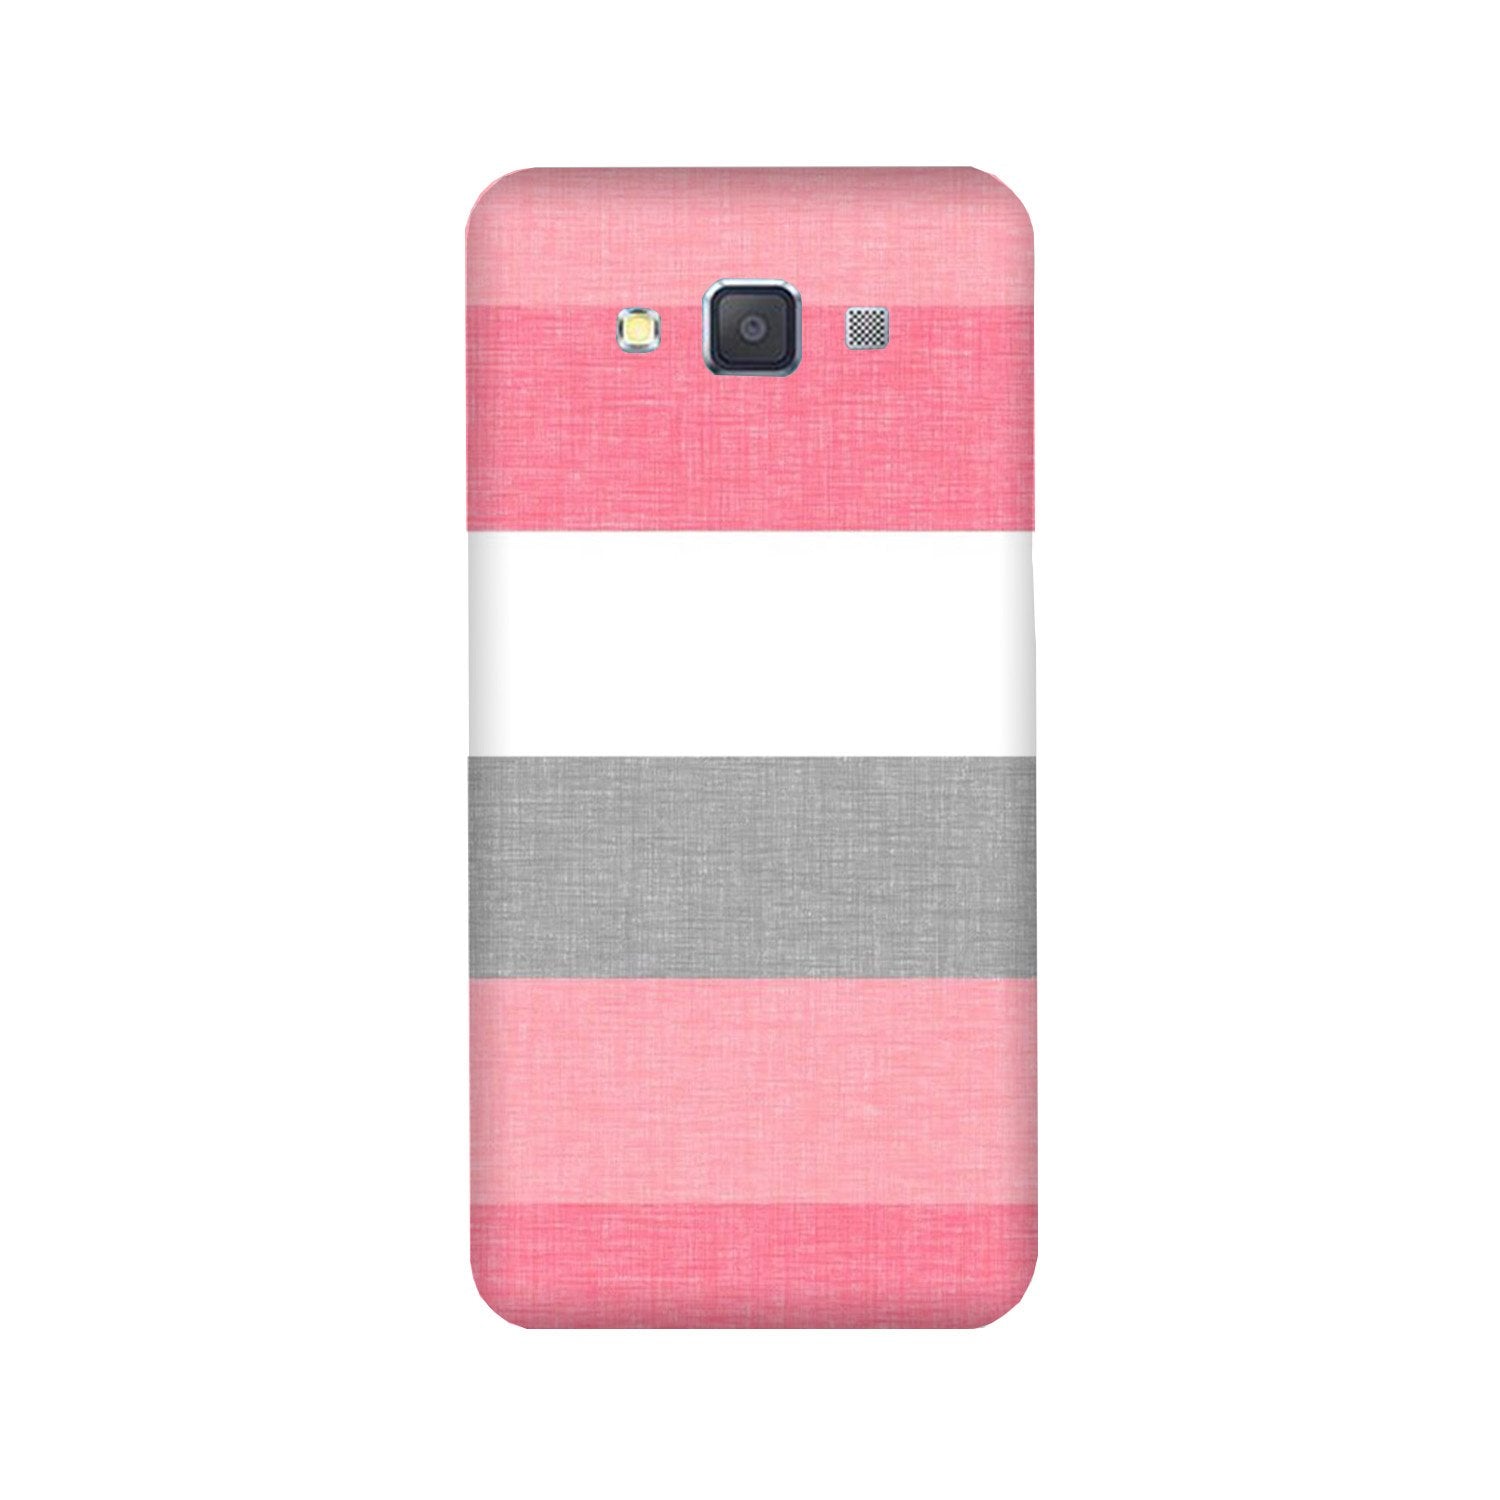 Pink white pattern Case for Galaxy Grand 2